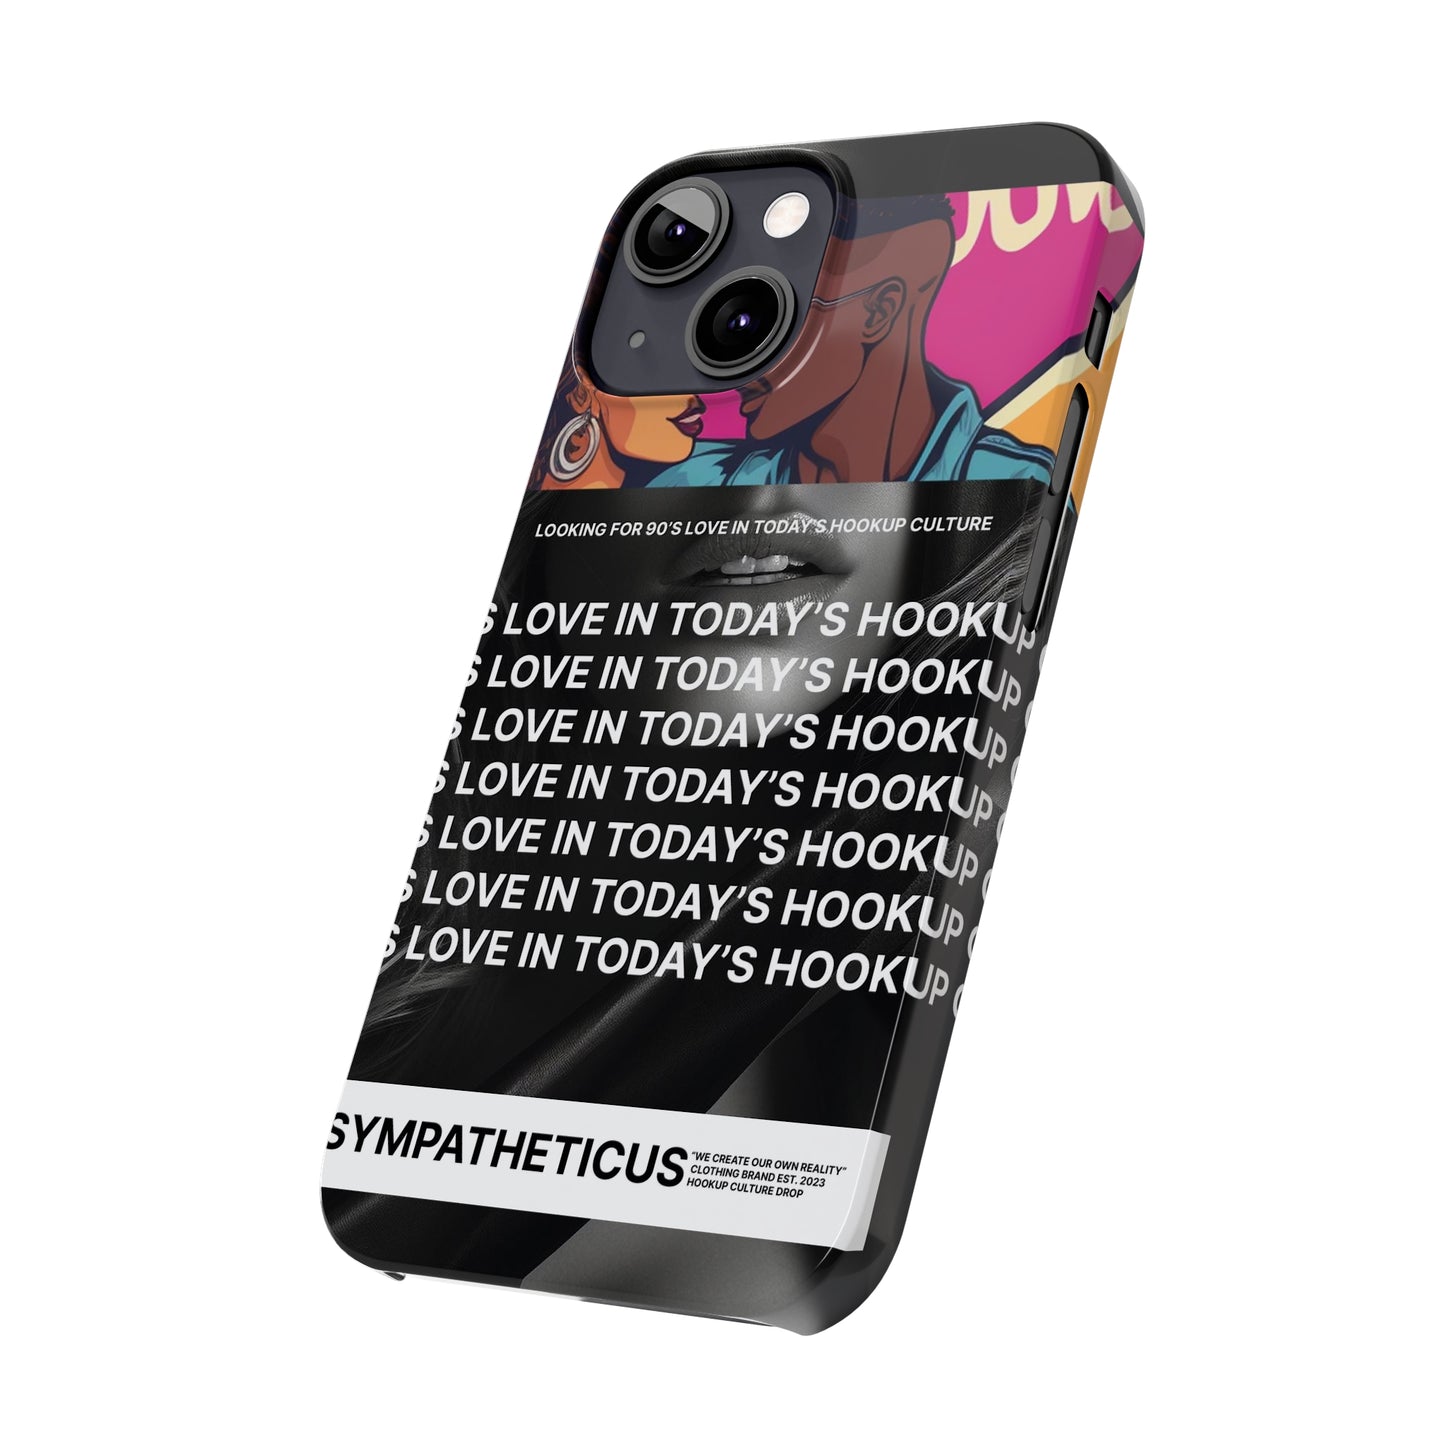 Hookup culture special iphone case-05